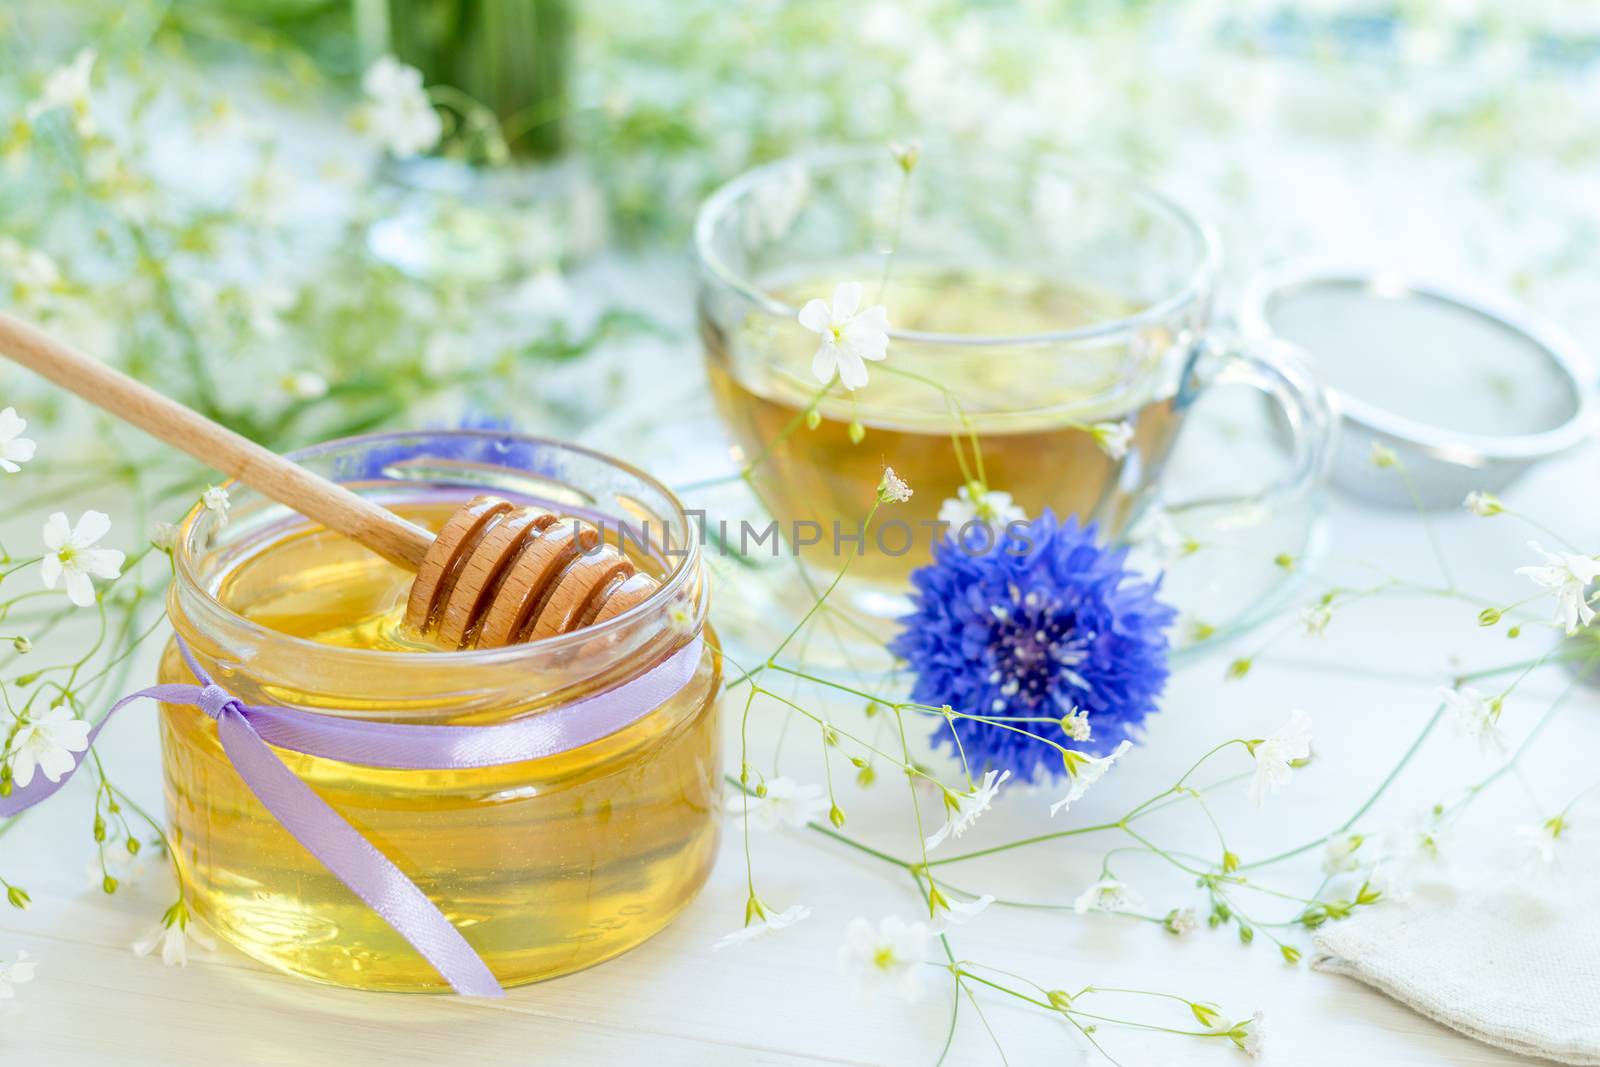 Honey in glass jars and cup of tea with white spring flowers and cornflower on windowsill. Shallow depth of field.